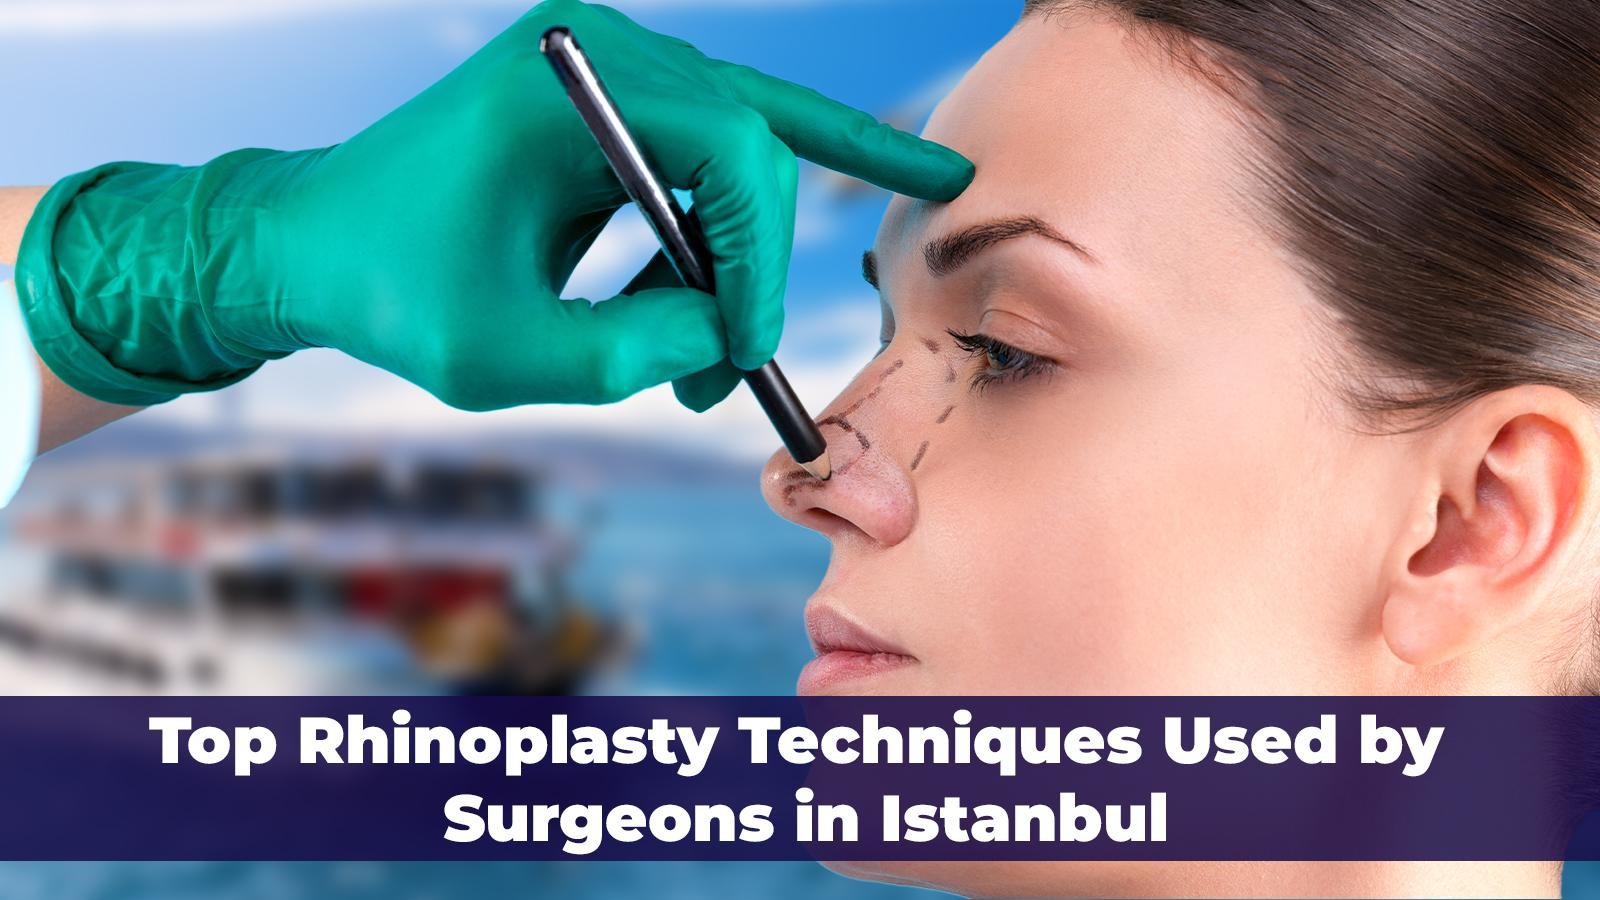 Top Rhinoplasty Techniques Used by Surgeons in Istanbul